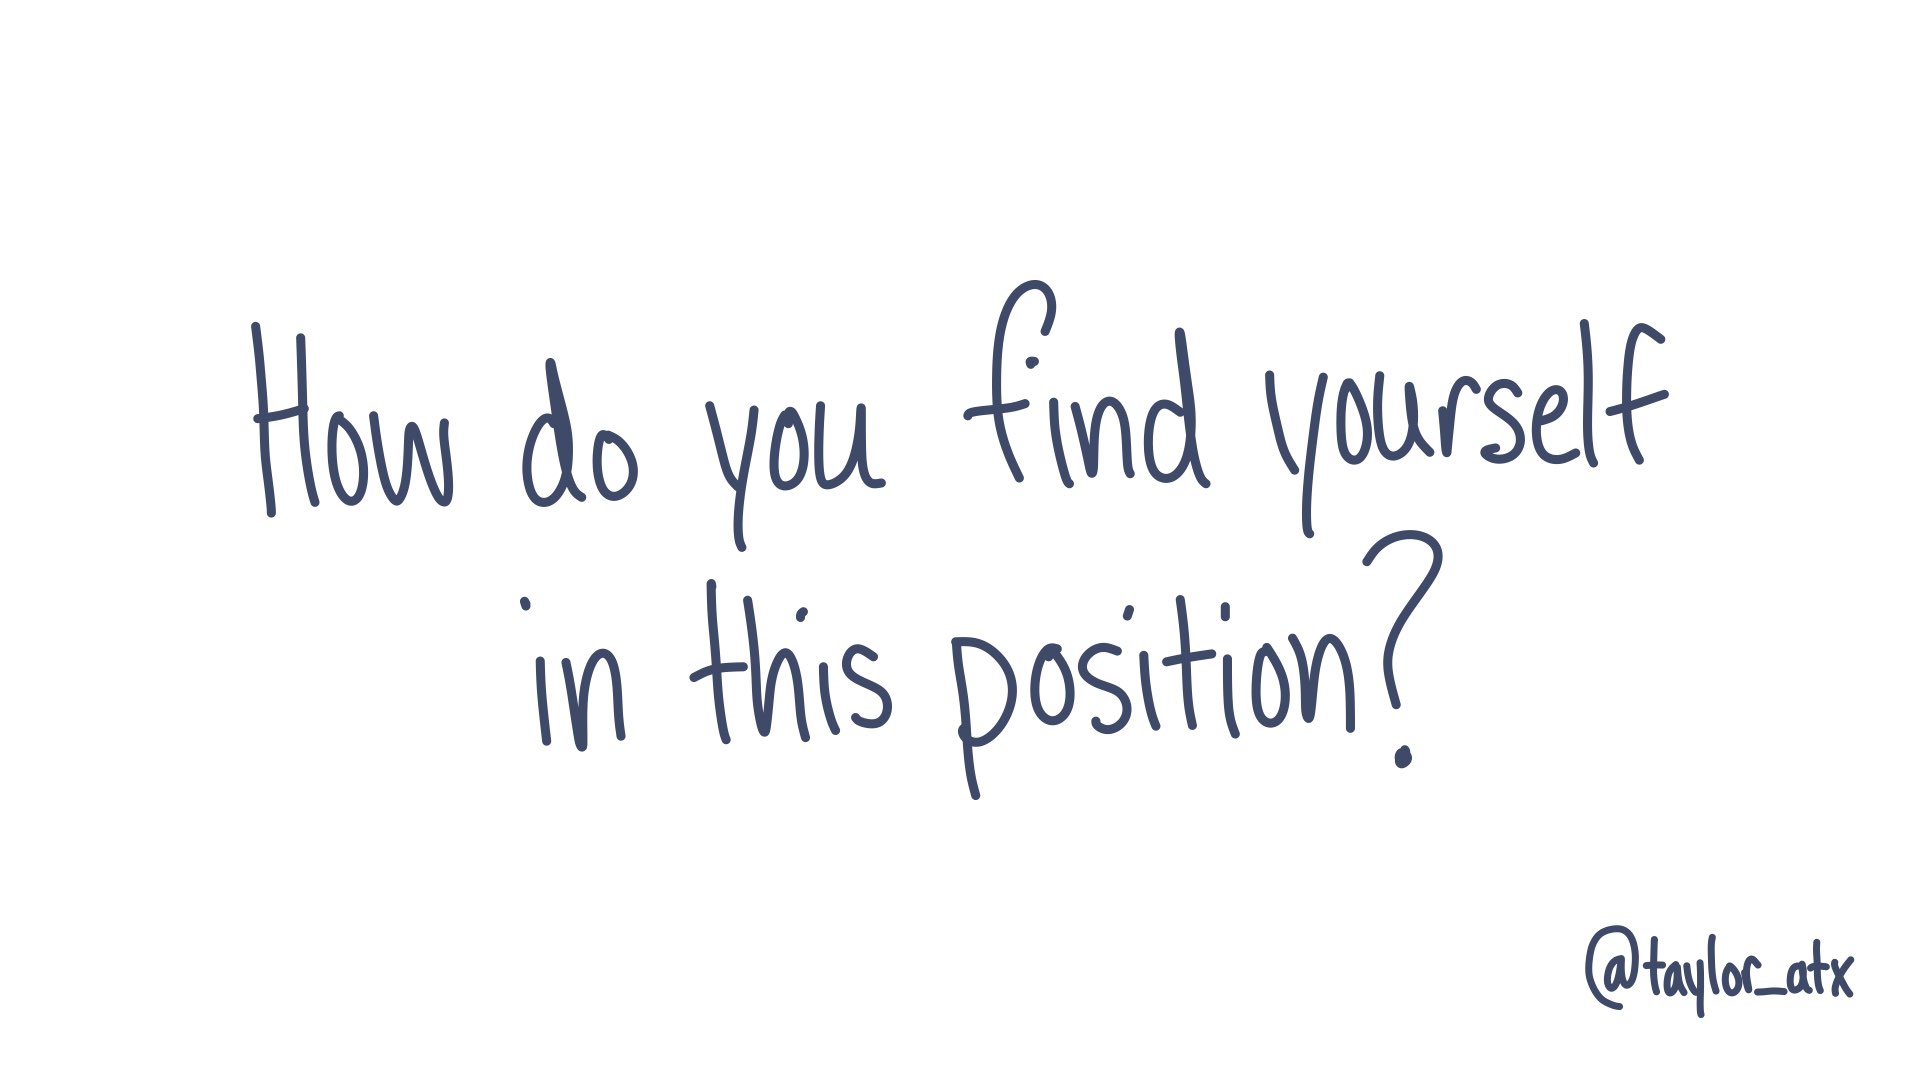 How do you find yourself in this position?